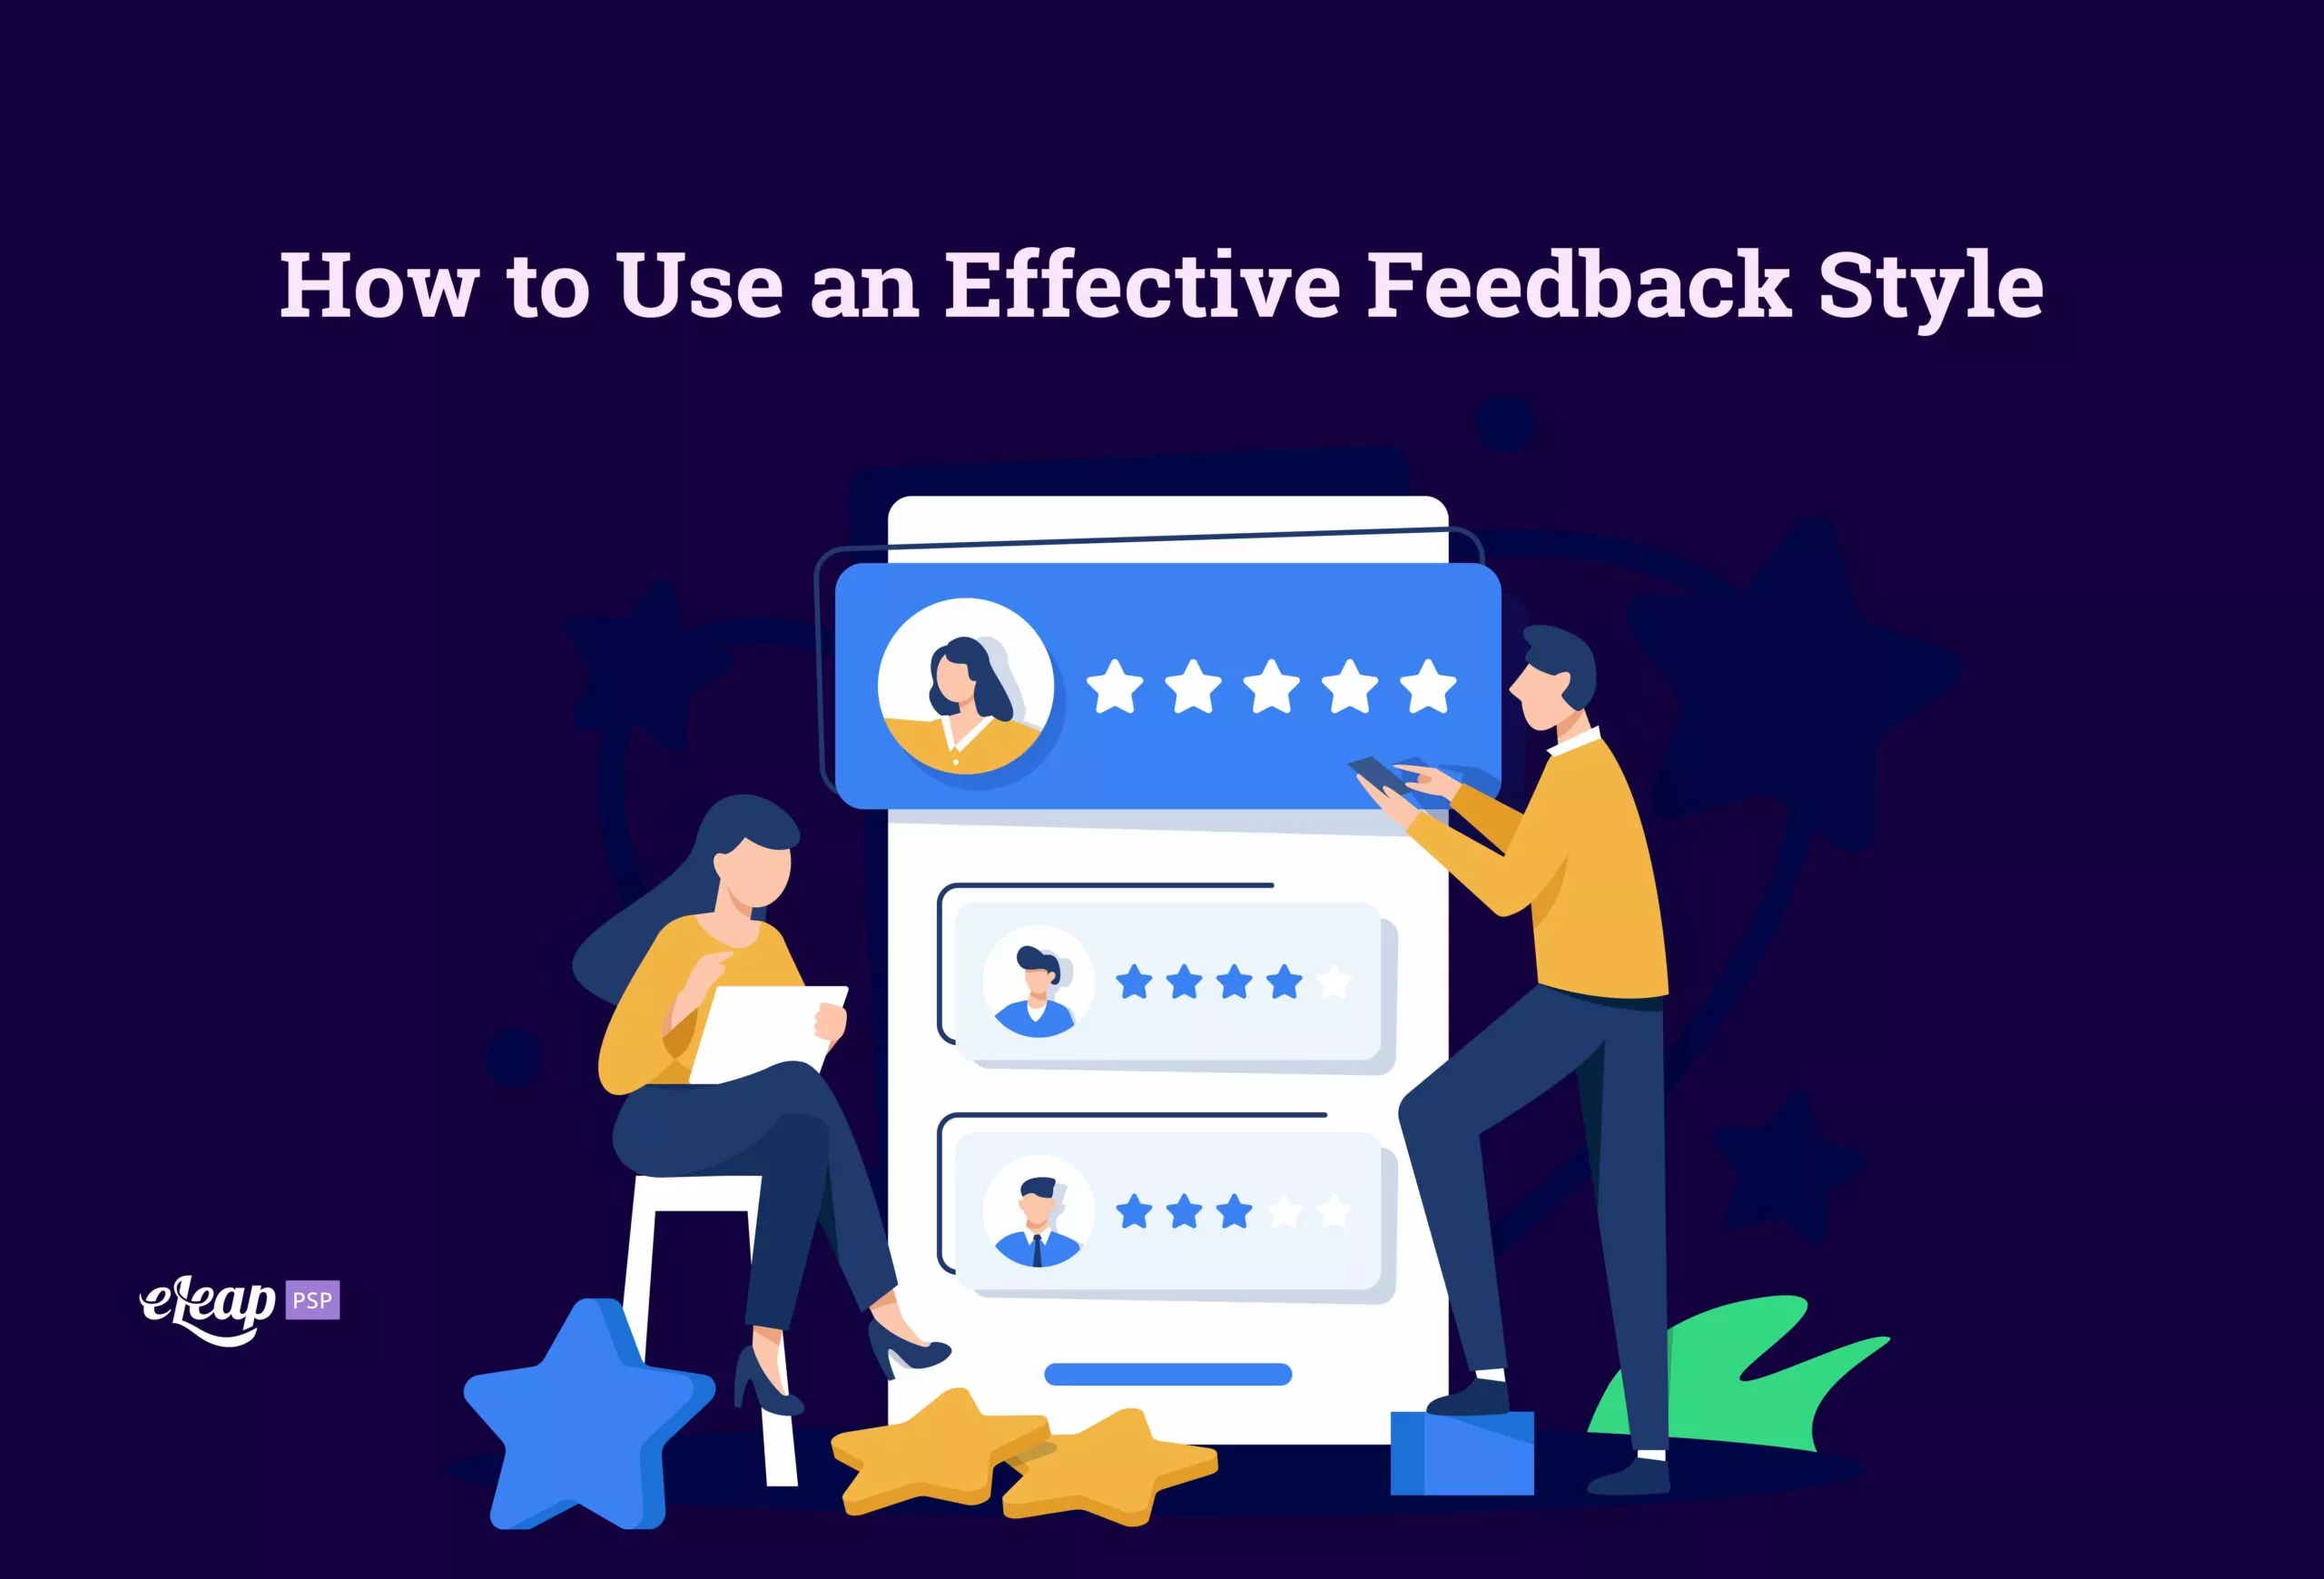 How to Use an Effective Feedback Style